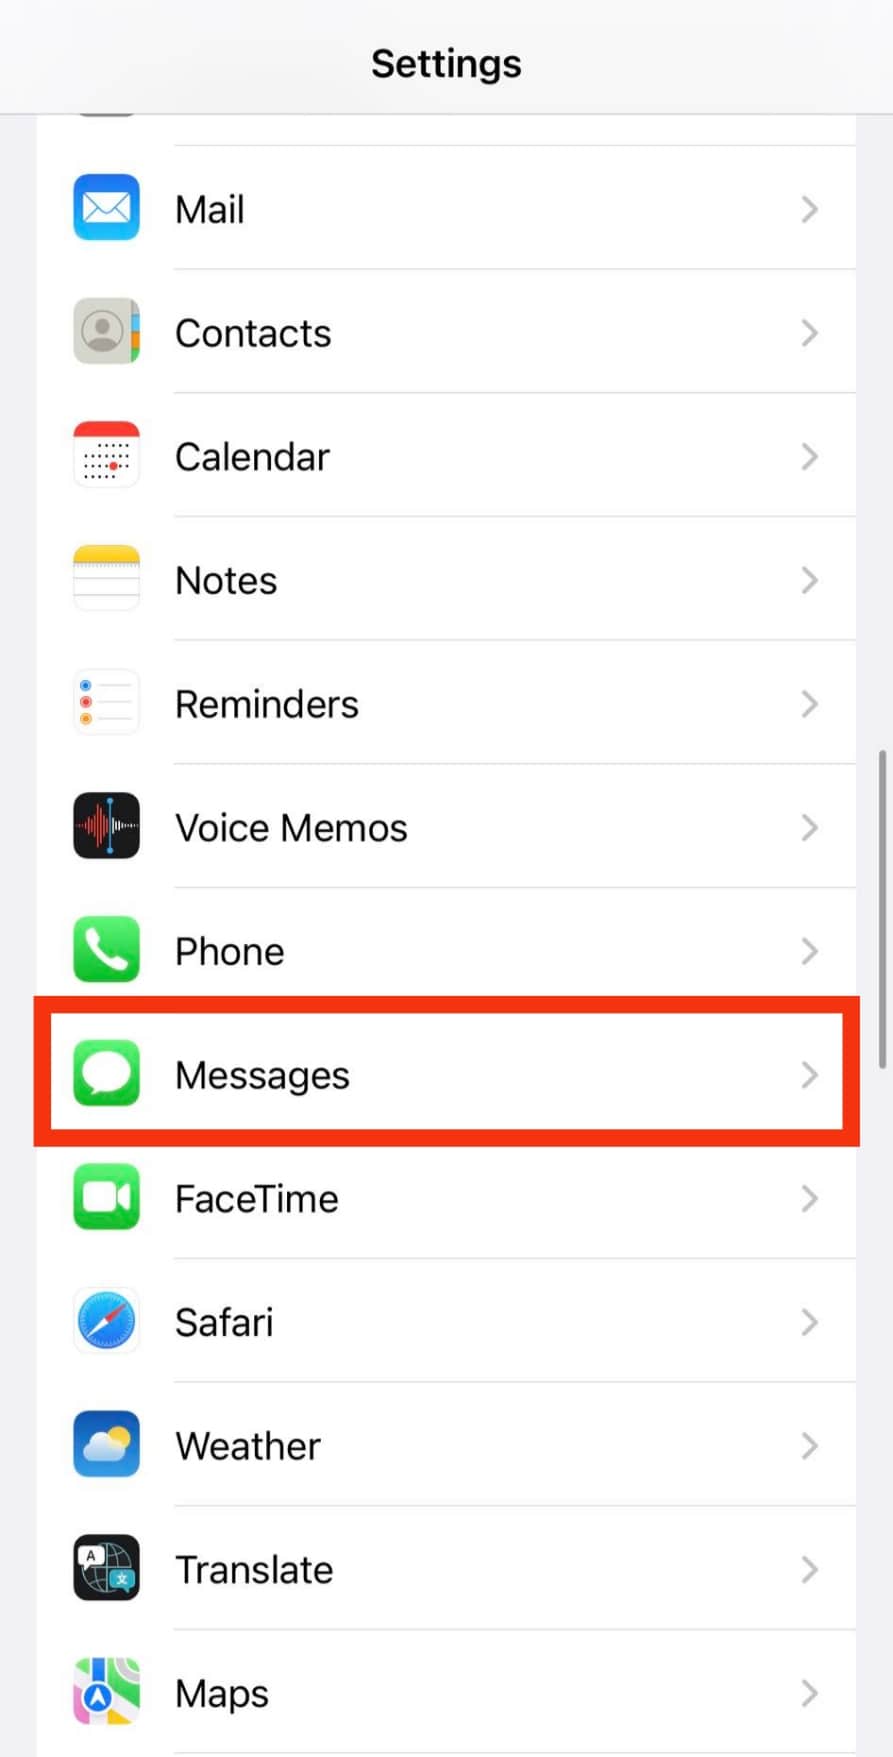 Click On The Messages Option